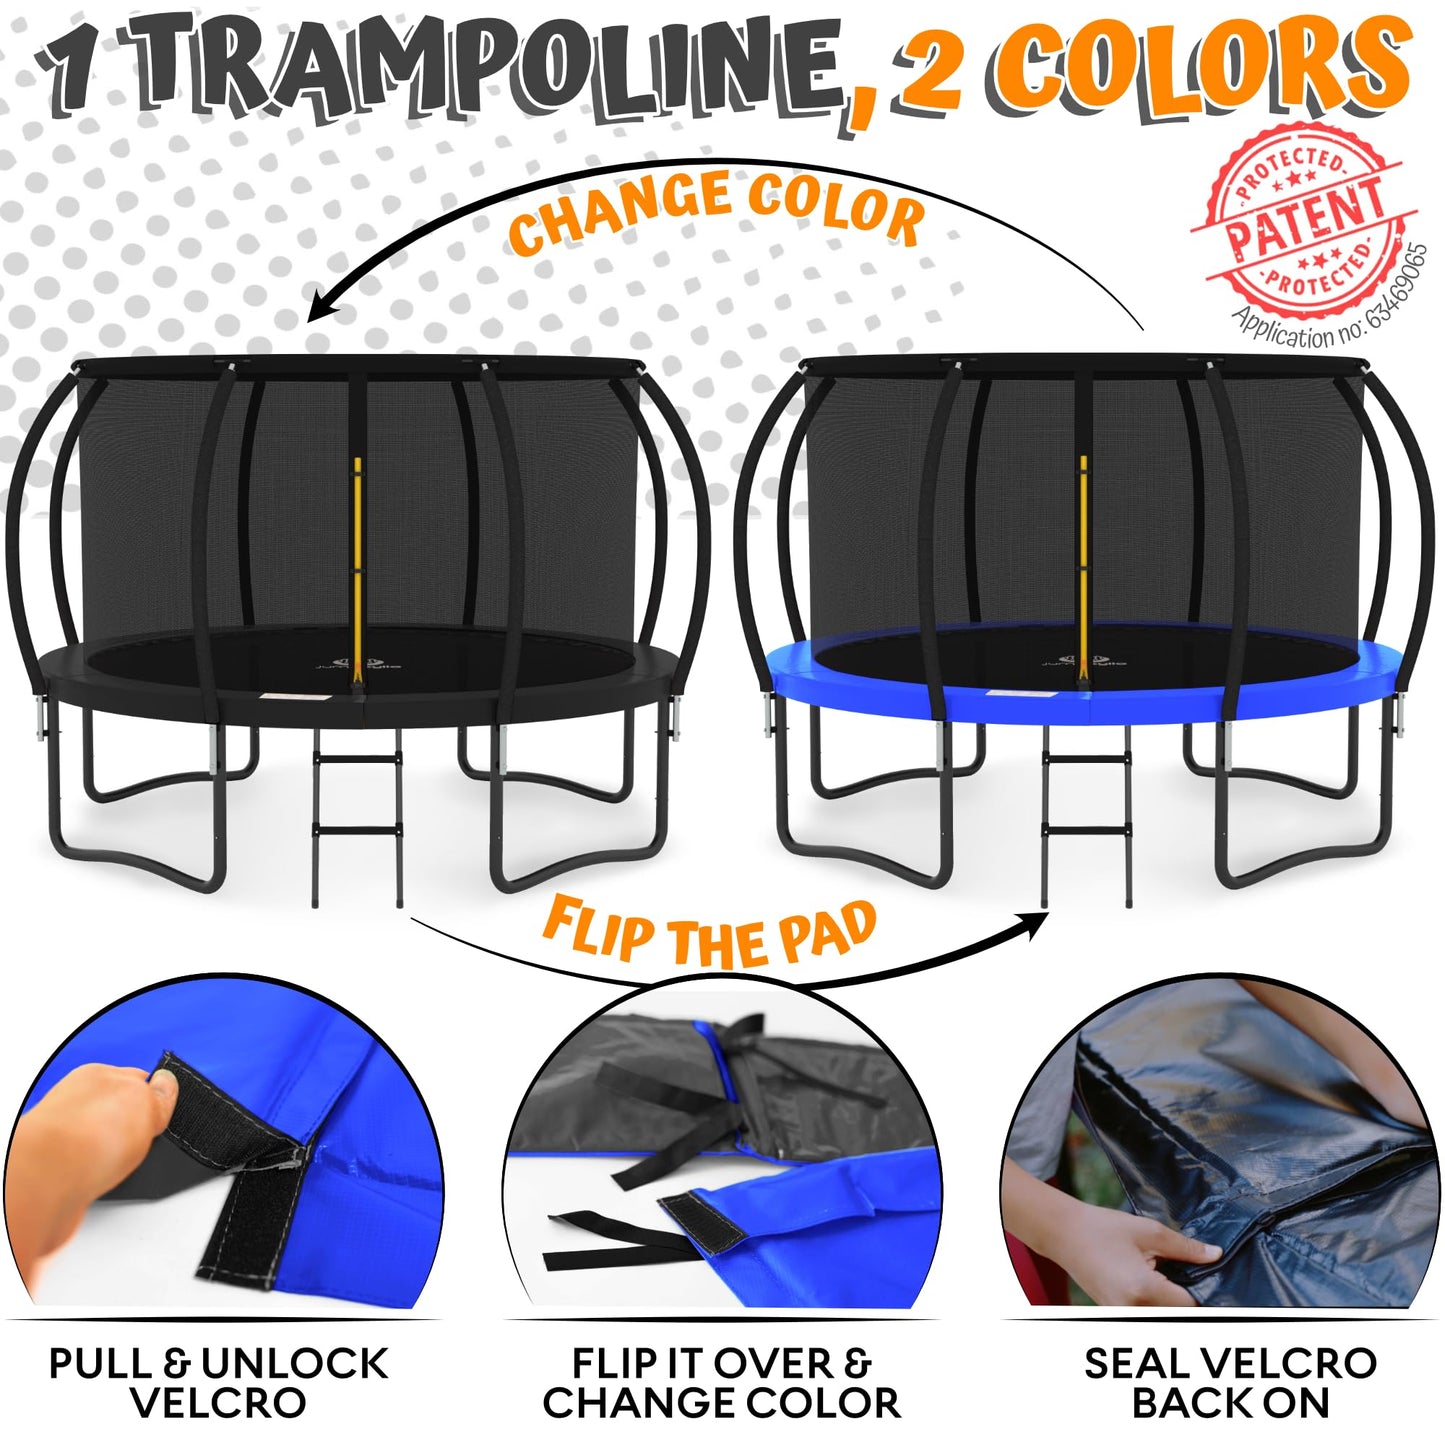 JUMPZYLLA Recreational Trampoline 8FT 10FT 12FT 14FT with Enclosure and Ladder, Galvanized Anti-Rust Coating for outdoor, ASTM Approval-for Kids